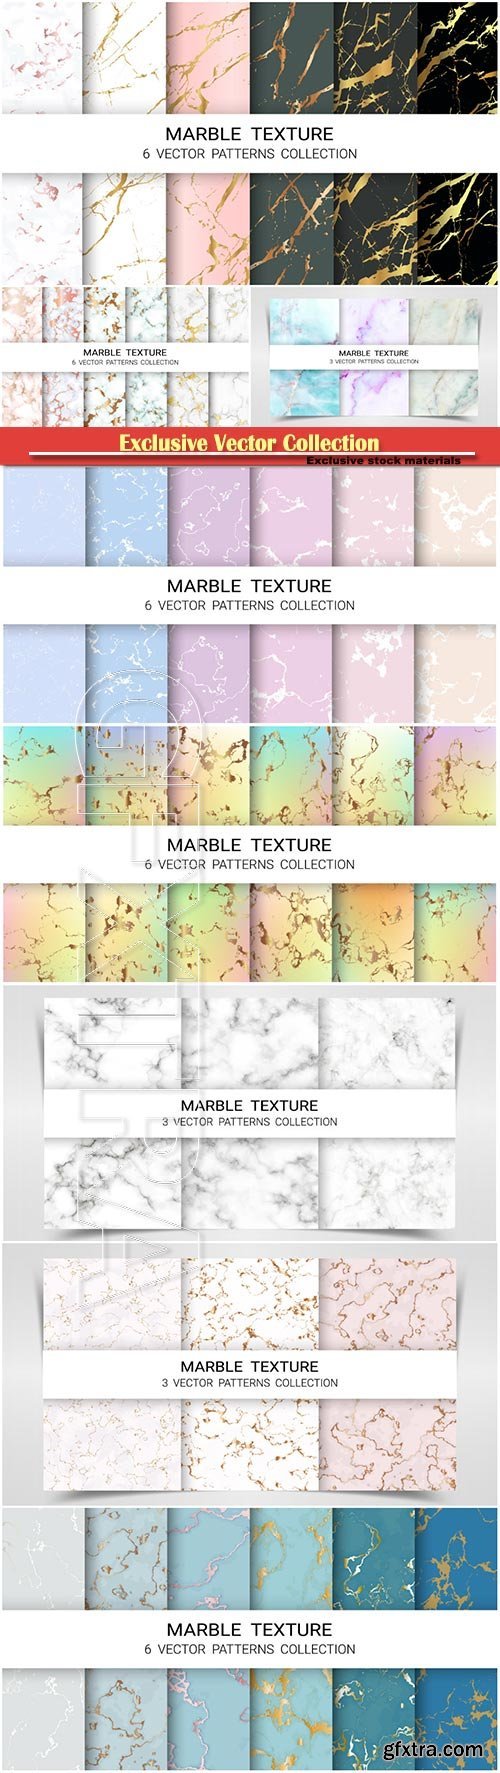 Marbles pattern vector illustration template